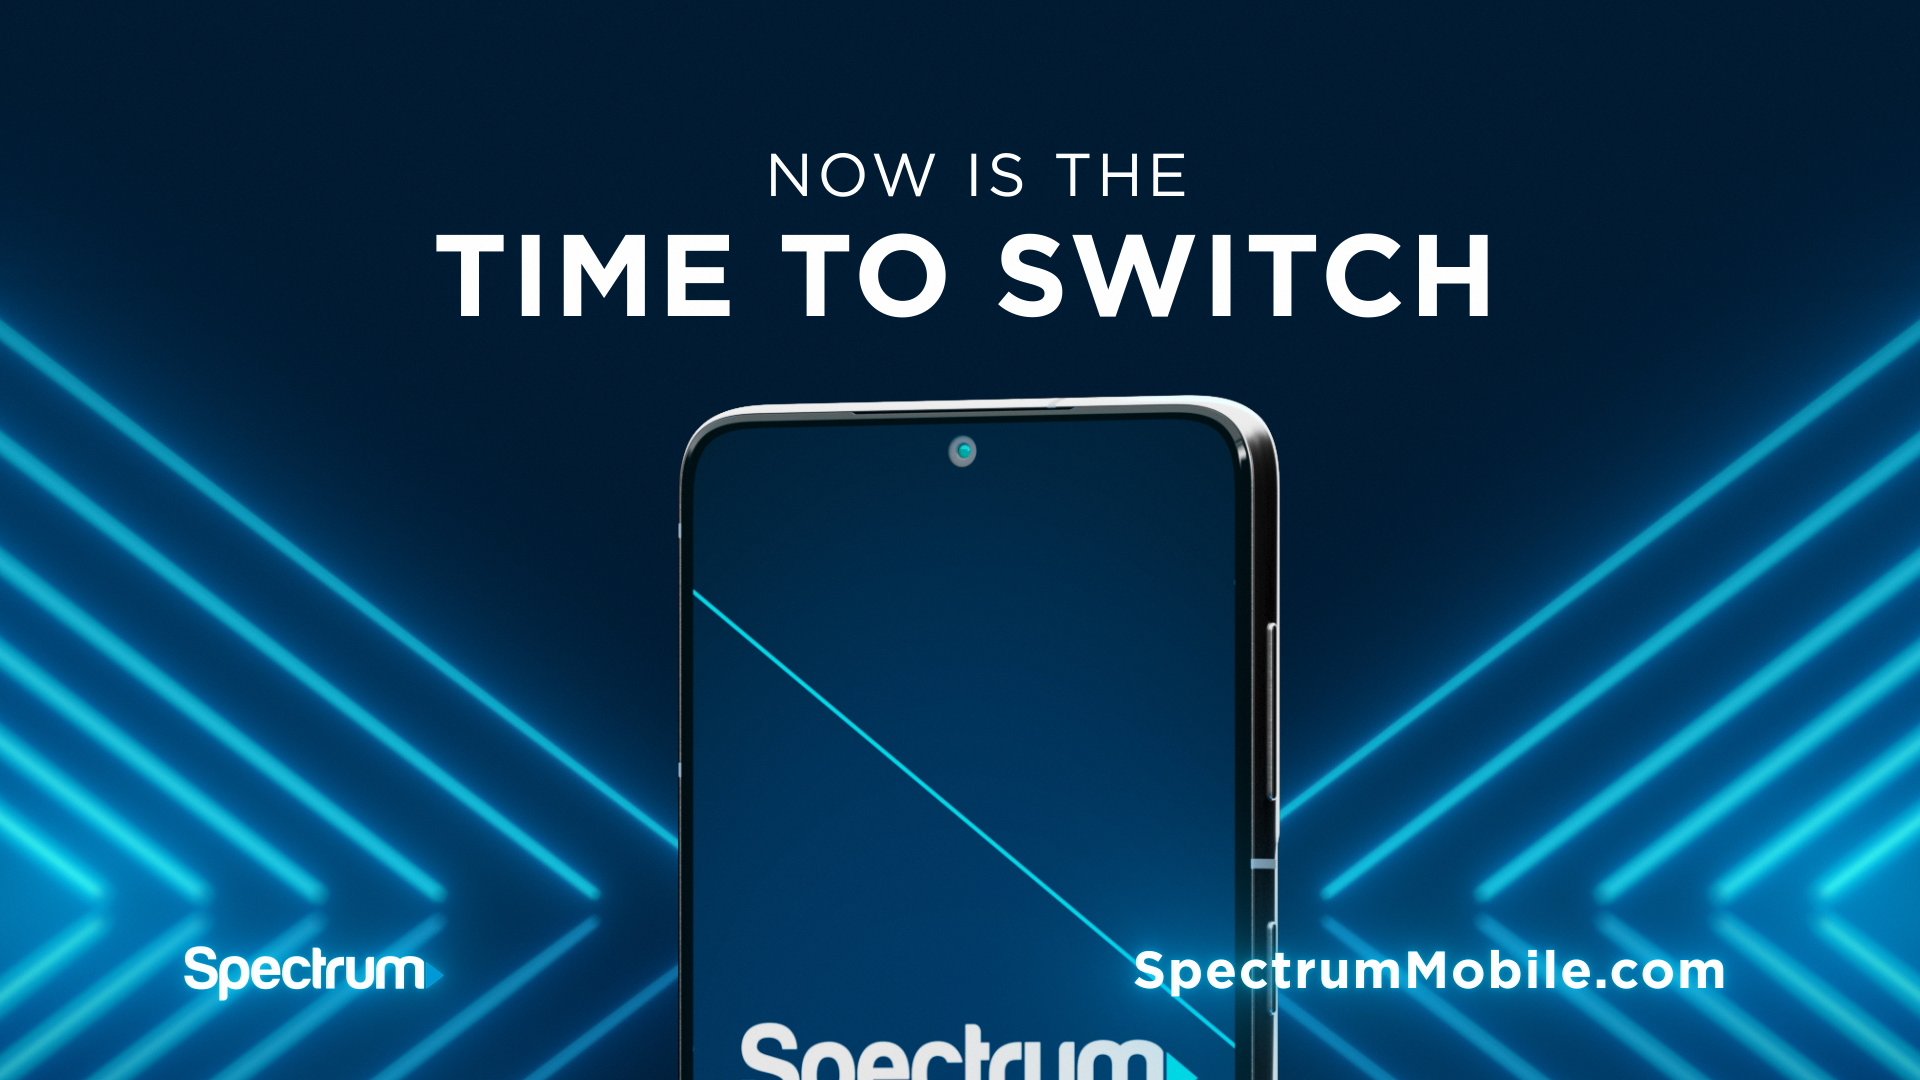 How to Switch to Spectrum Mobile  